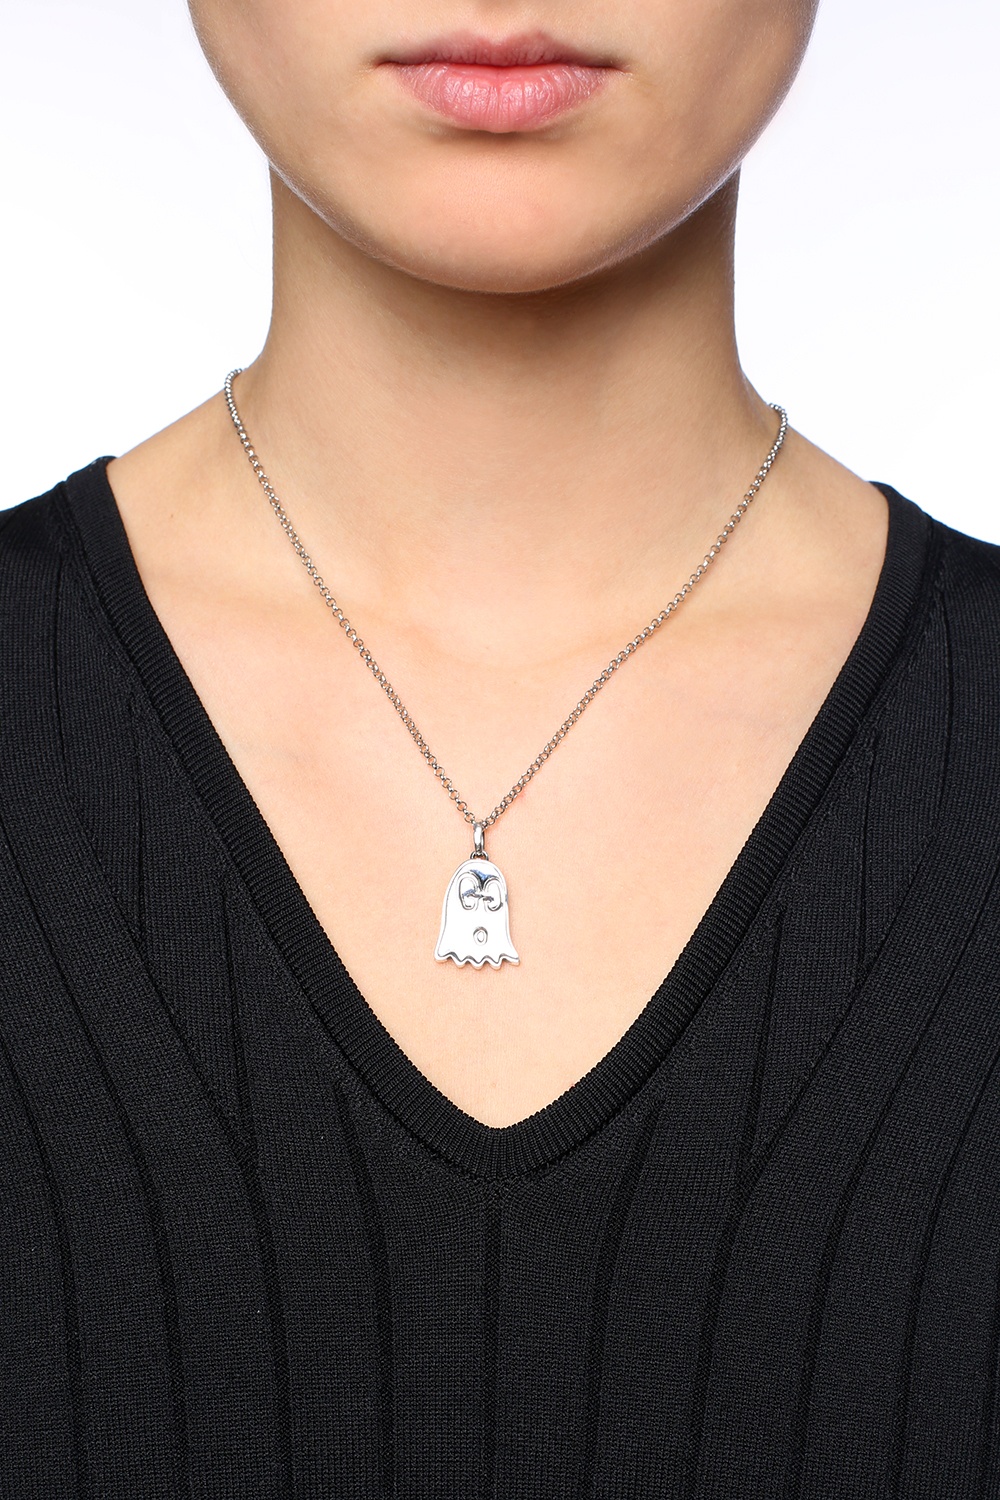 gucci ghost silver necklace